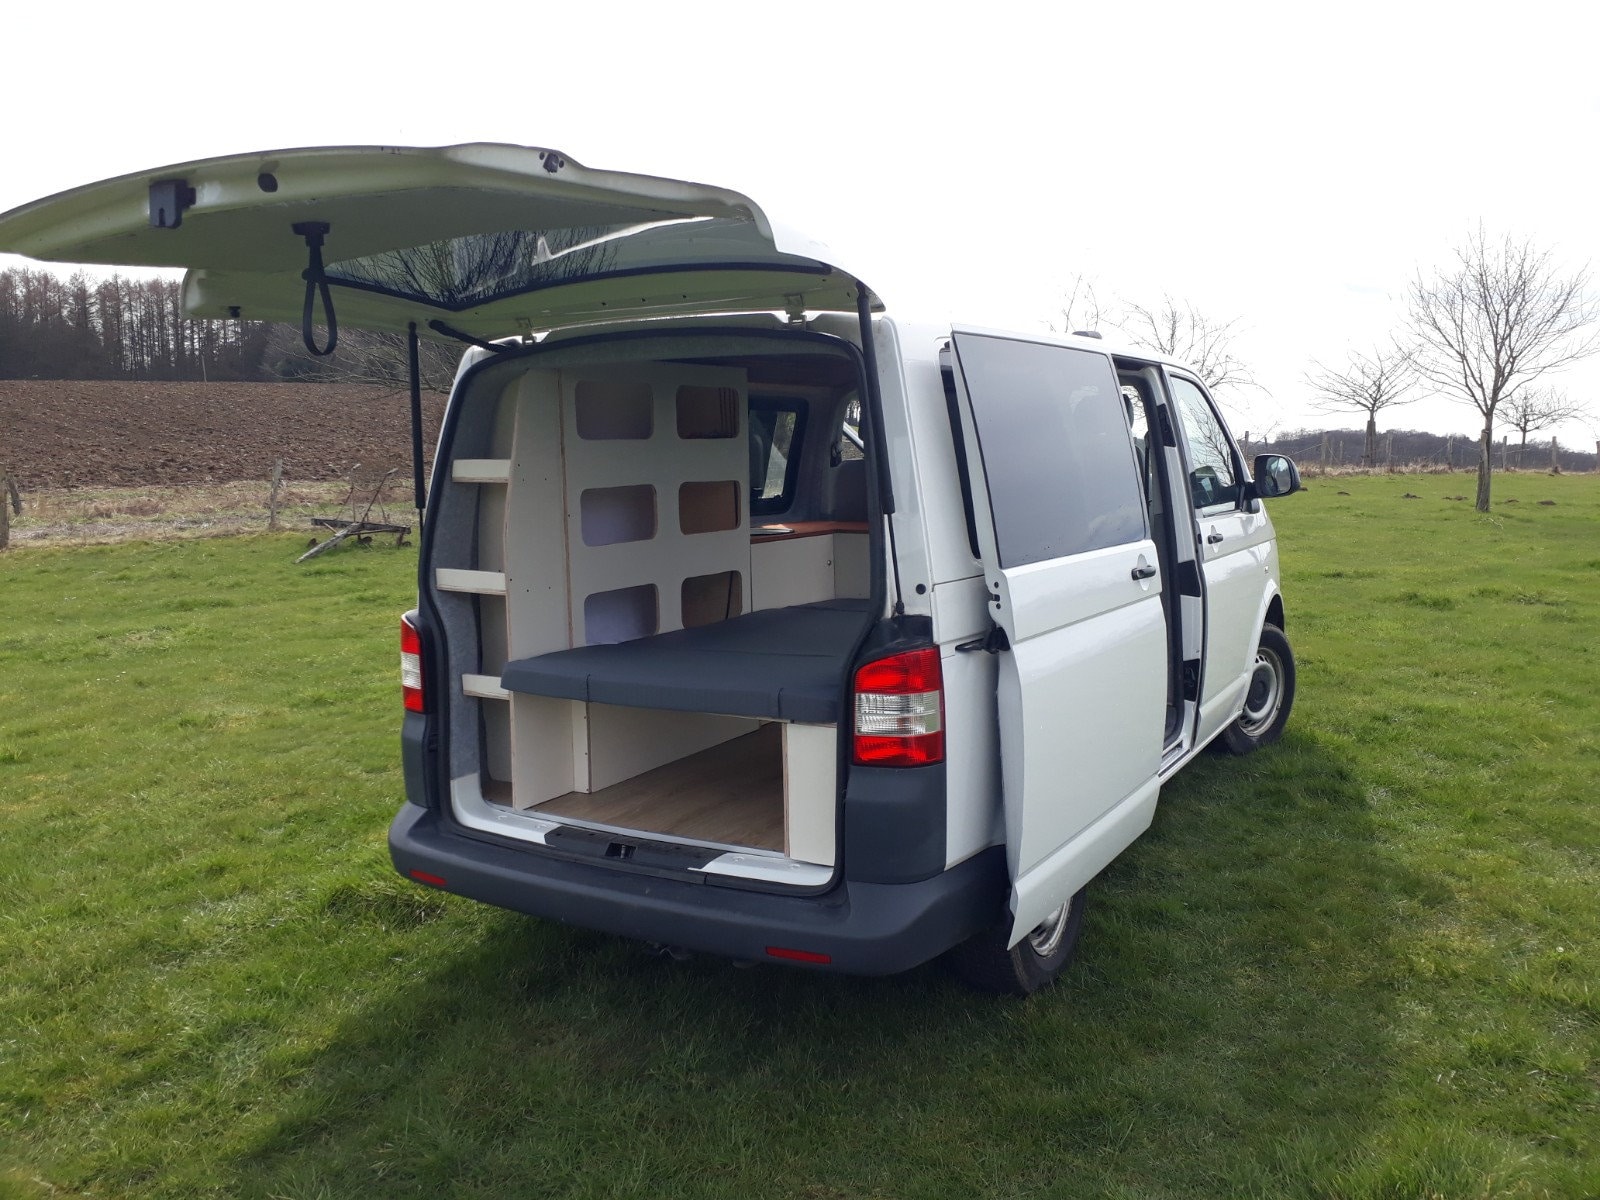 VW T5/6 Campervan DIY Conversion Kits - 40% More Space, Pop-Out Bed, Push-Up  Roof, & Alu-Store 